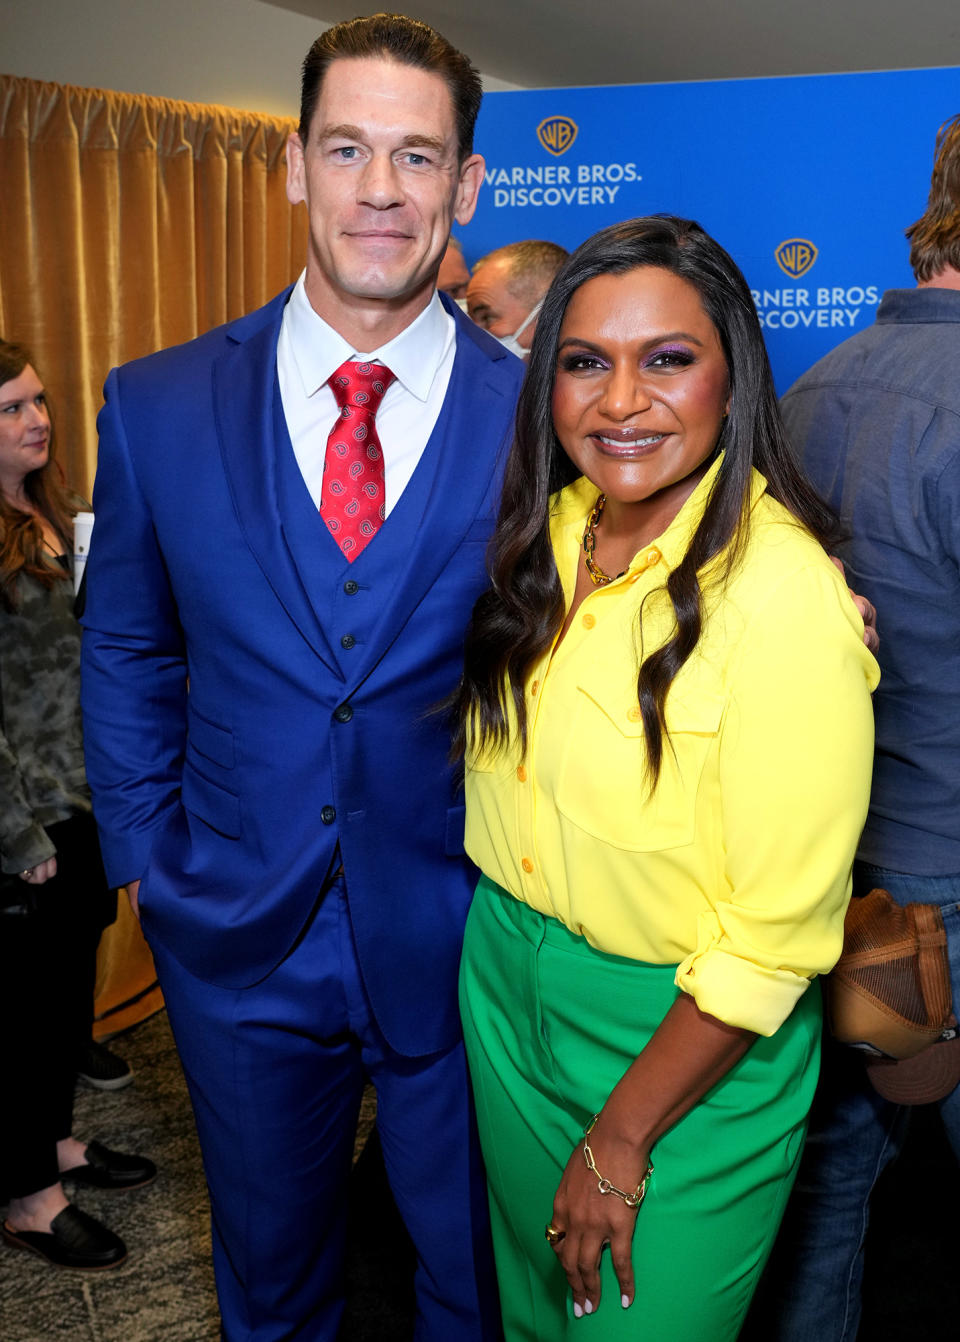 <p>John Cena and Mindy Kaling pair up at the Warner Bros. Discovery Upfront 2022 in New York City on May 18.</p>